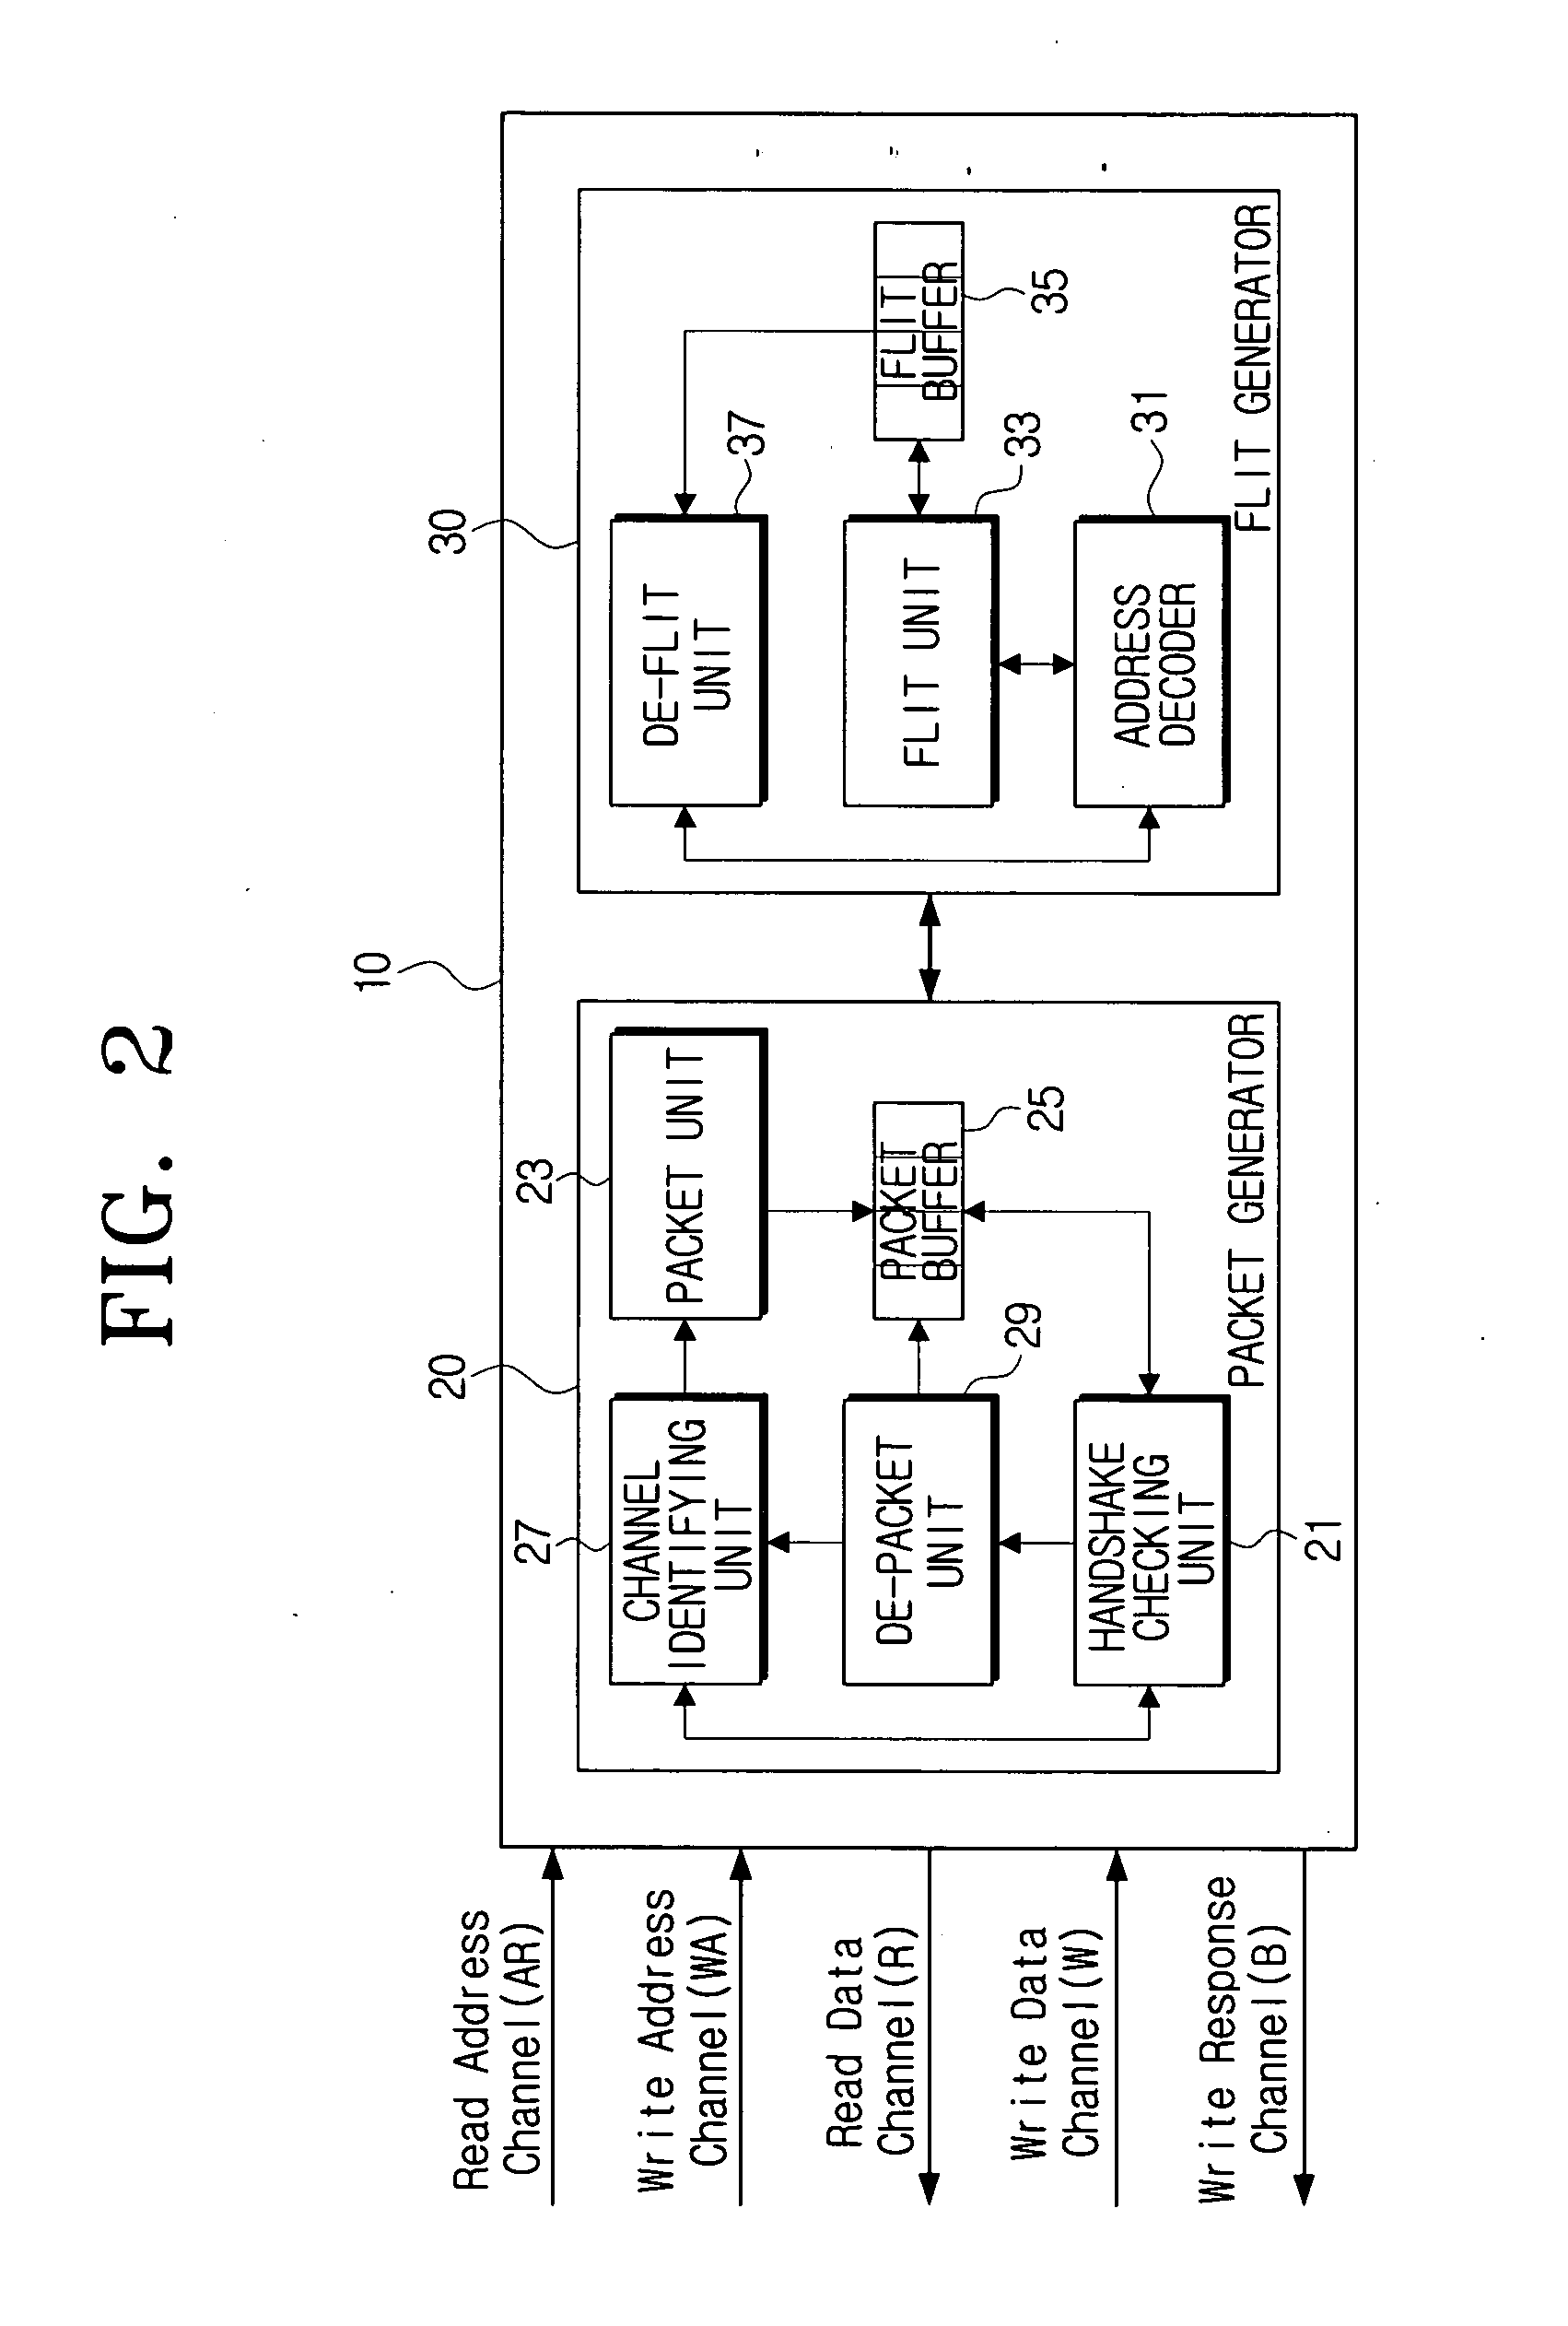 Network on chip system employing an advanced extensible interface protocol